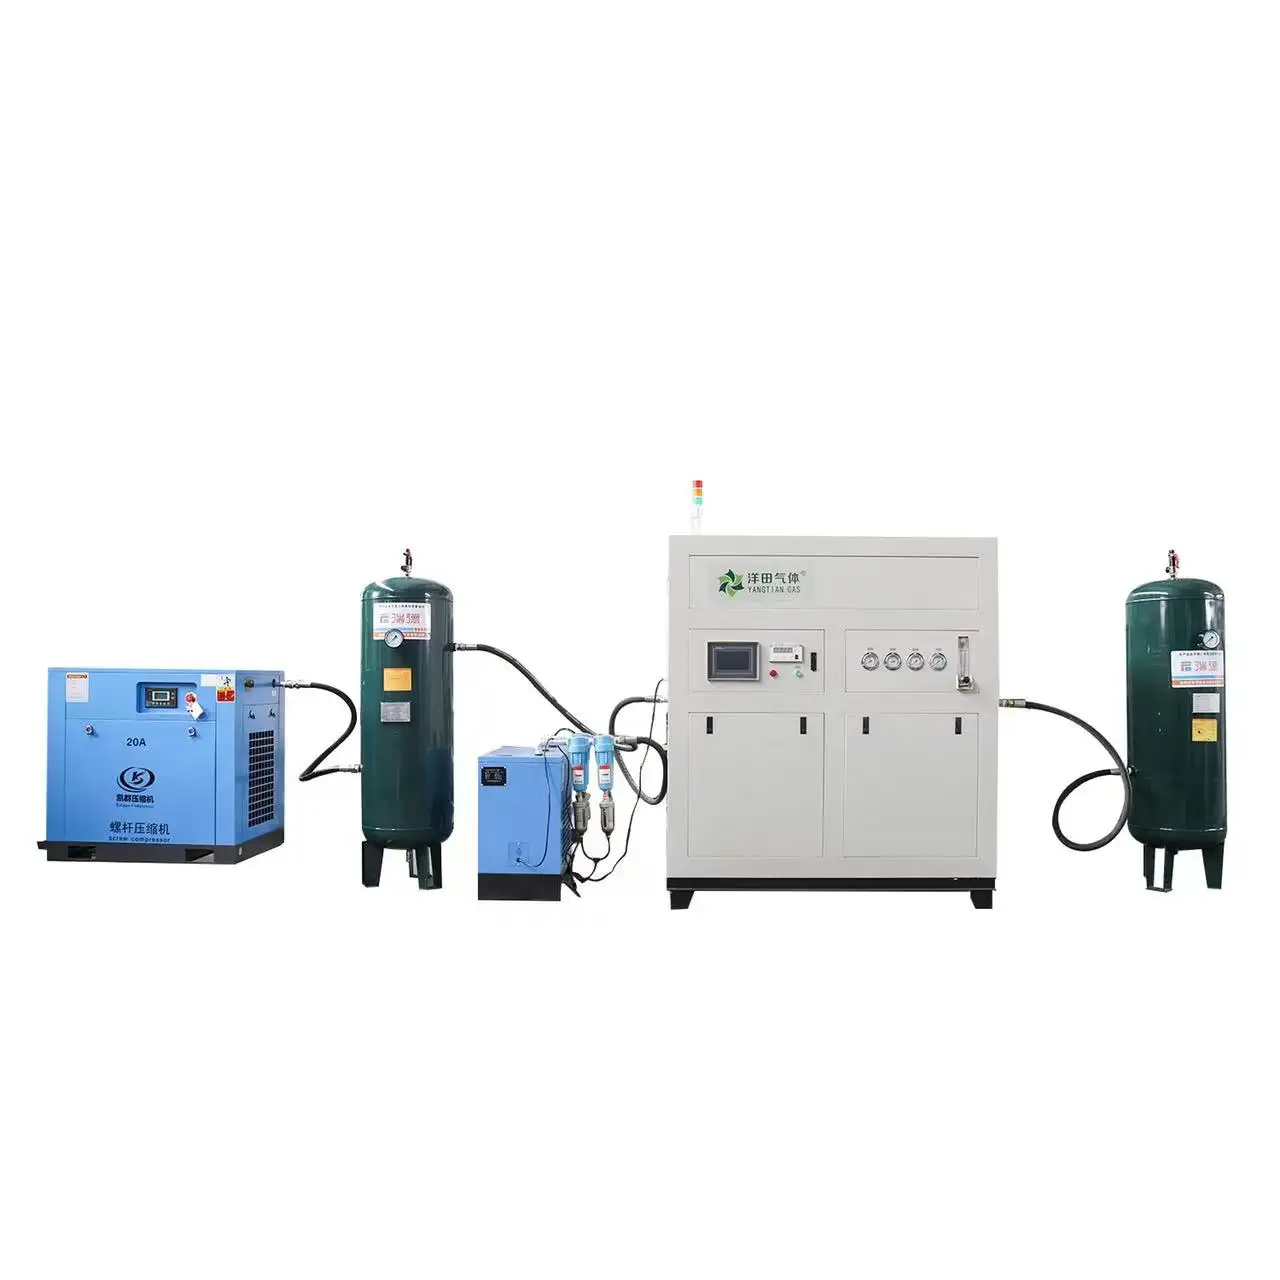 China Manufacturer Oxygen Generation Plant For Hospital Small Oxygen Plant With O2 Refilling Plant